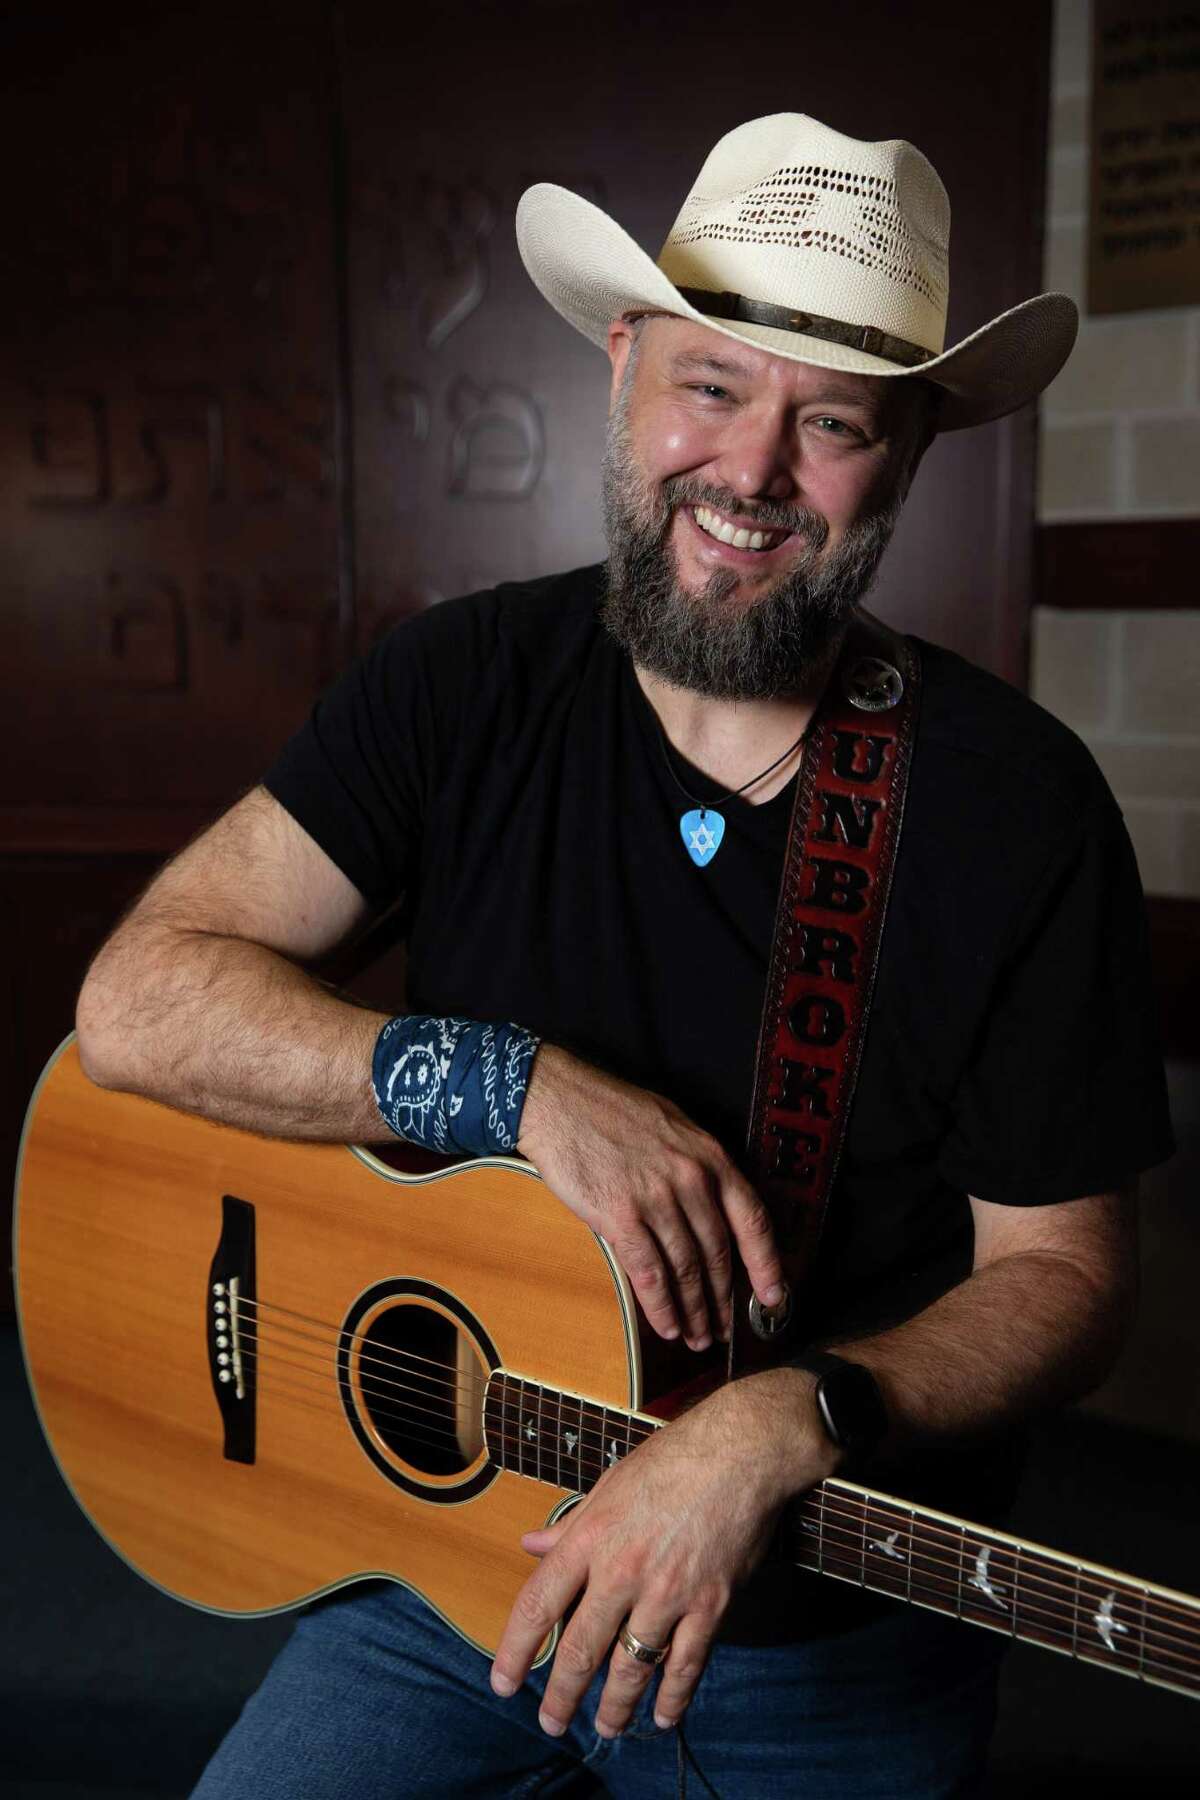 Country singer Joe Buchanan poses for a photograph at Congregation Shaar Hashalom, where he converted to Judaism, Tuesday, June 7, 2022, in Houston. Buchanan has a Jewish theme to his songs. He used songwriting to understand the new-to-him religious tenets.